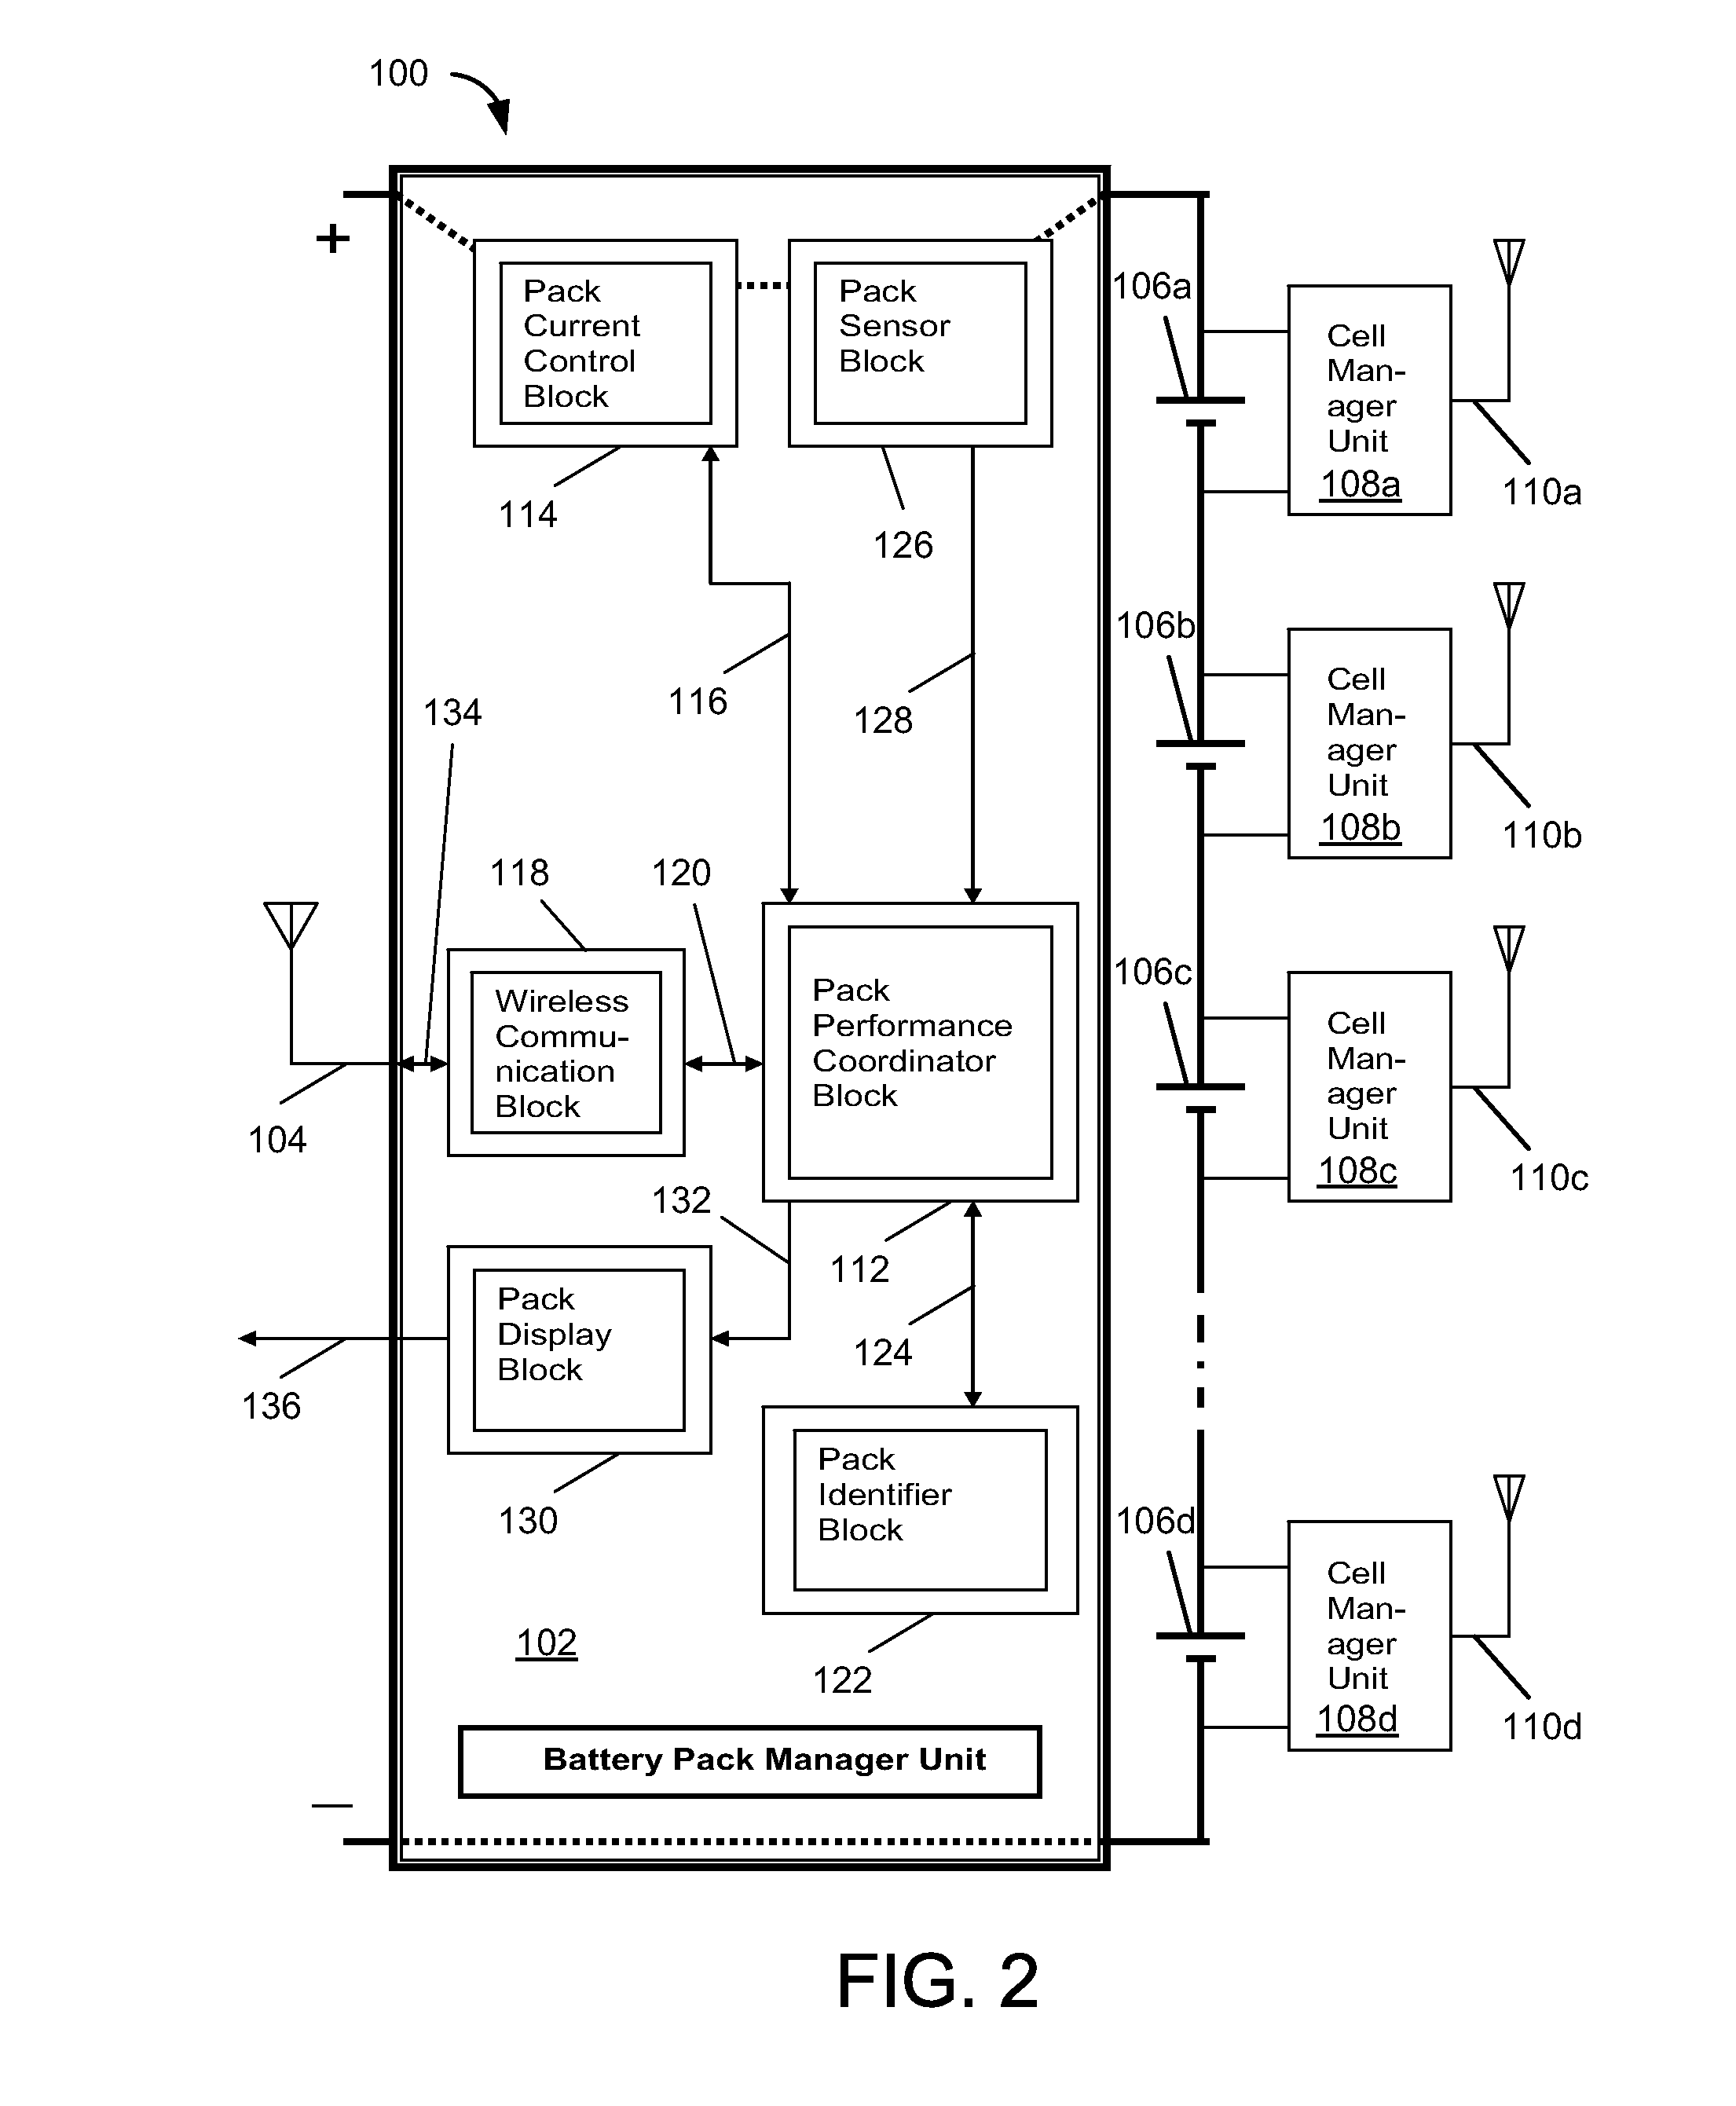 Battery pack manager unit and method for using same to extend the life of a battery pack